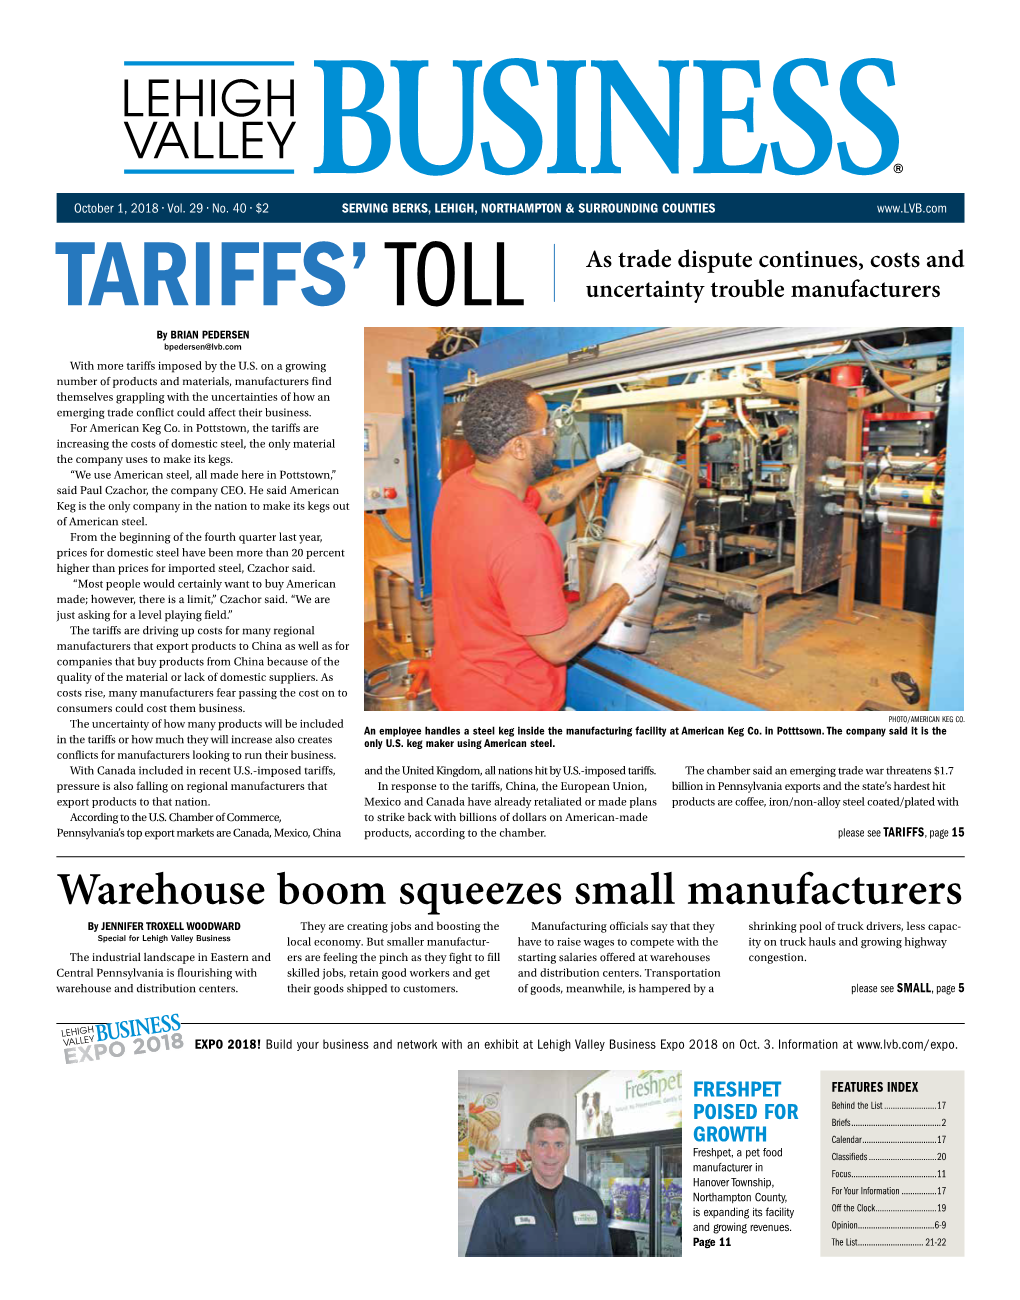 Warehouse Boom Squeezes Small Manufacturers